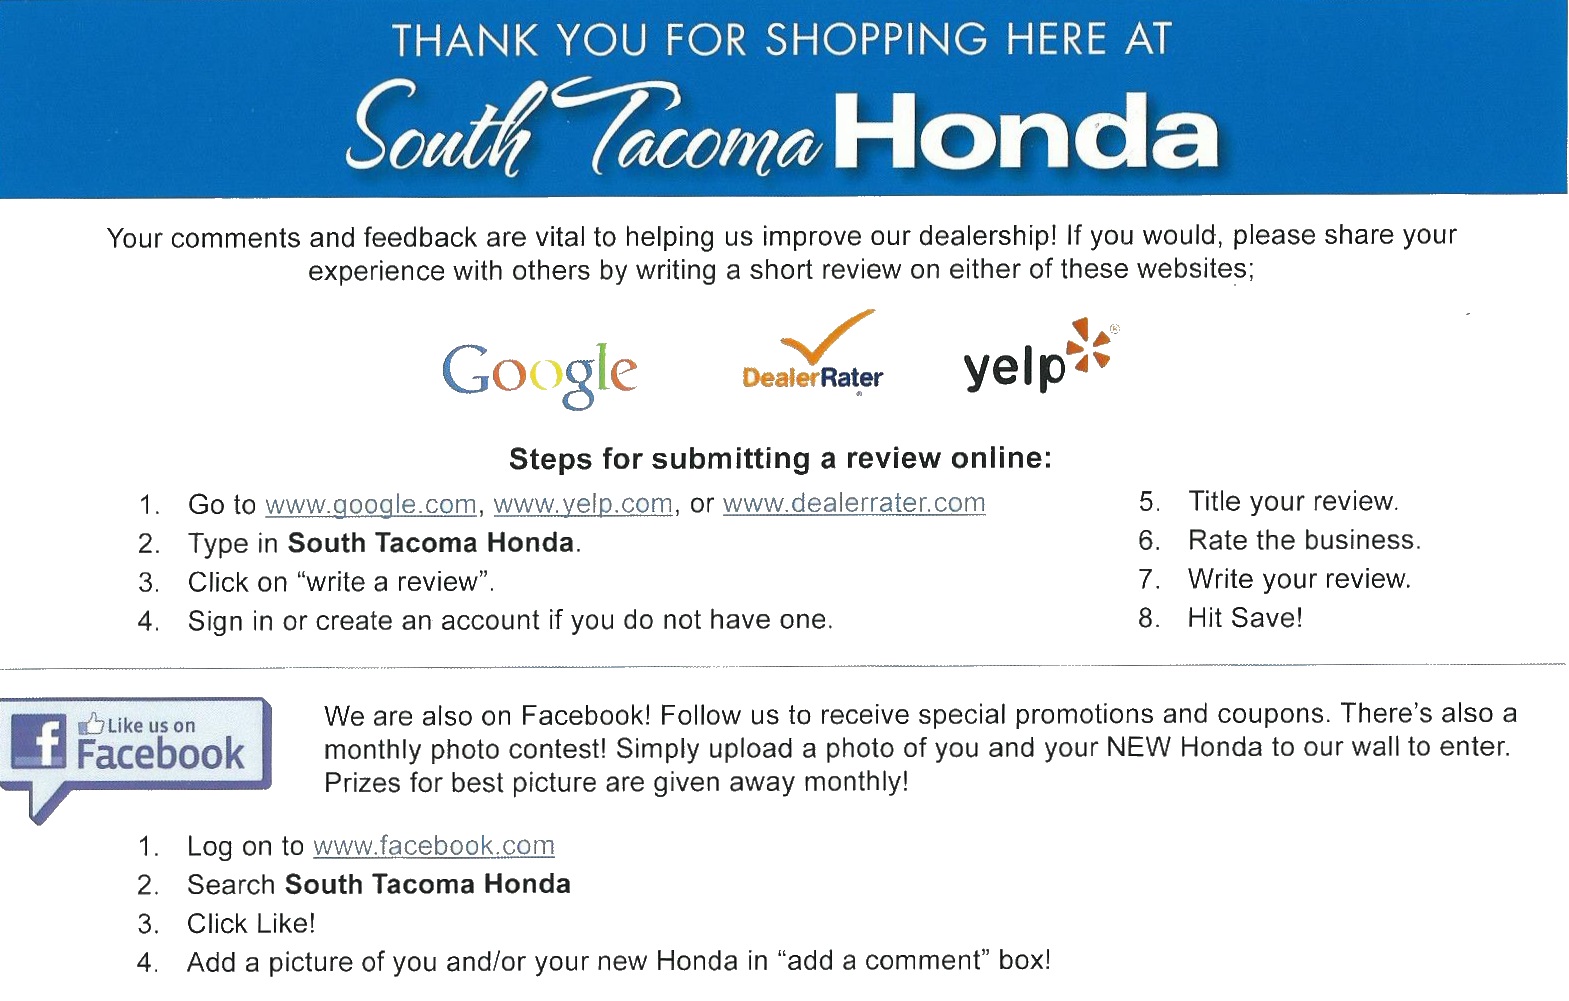 The Negative Review Reaction: Avoiding a negative review: Brand Reputation Management: I love this postcard I recently received from South Tacoma Honda after we had the airbag recall performed. They not only followed up but asked for a review AND gave us directions to make it easy! #BeTactical